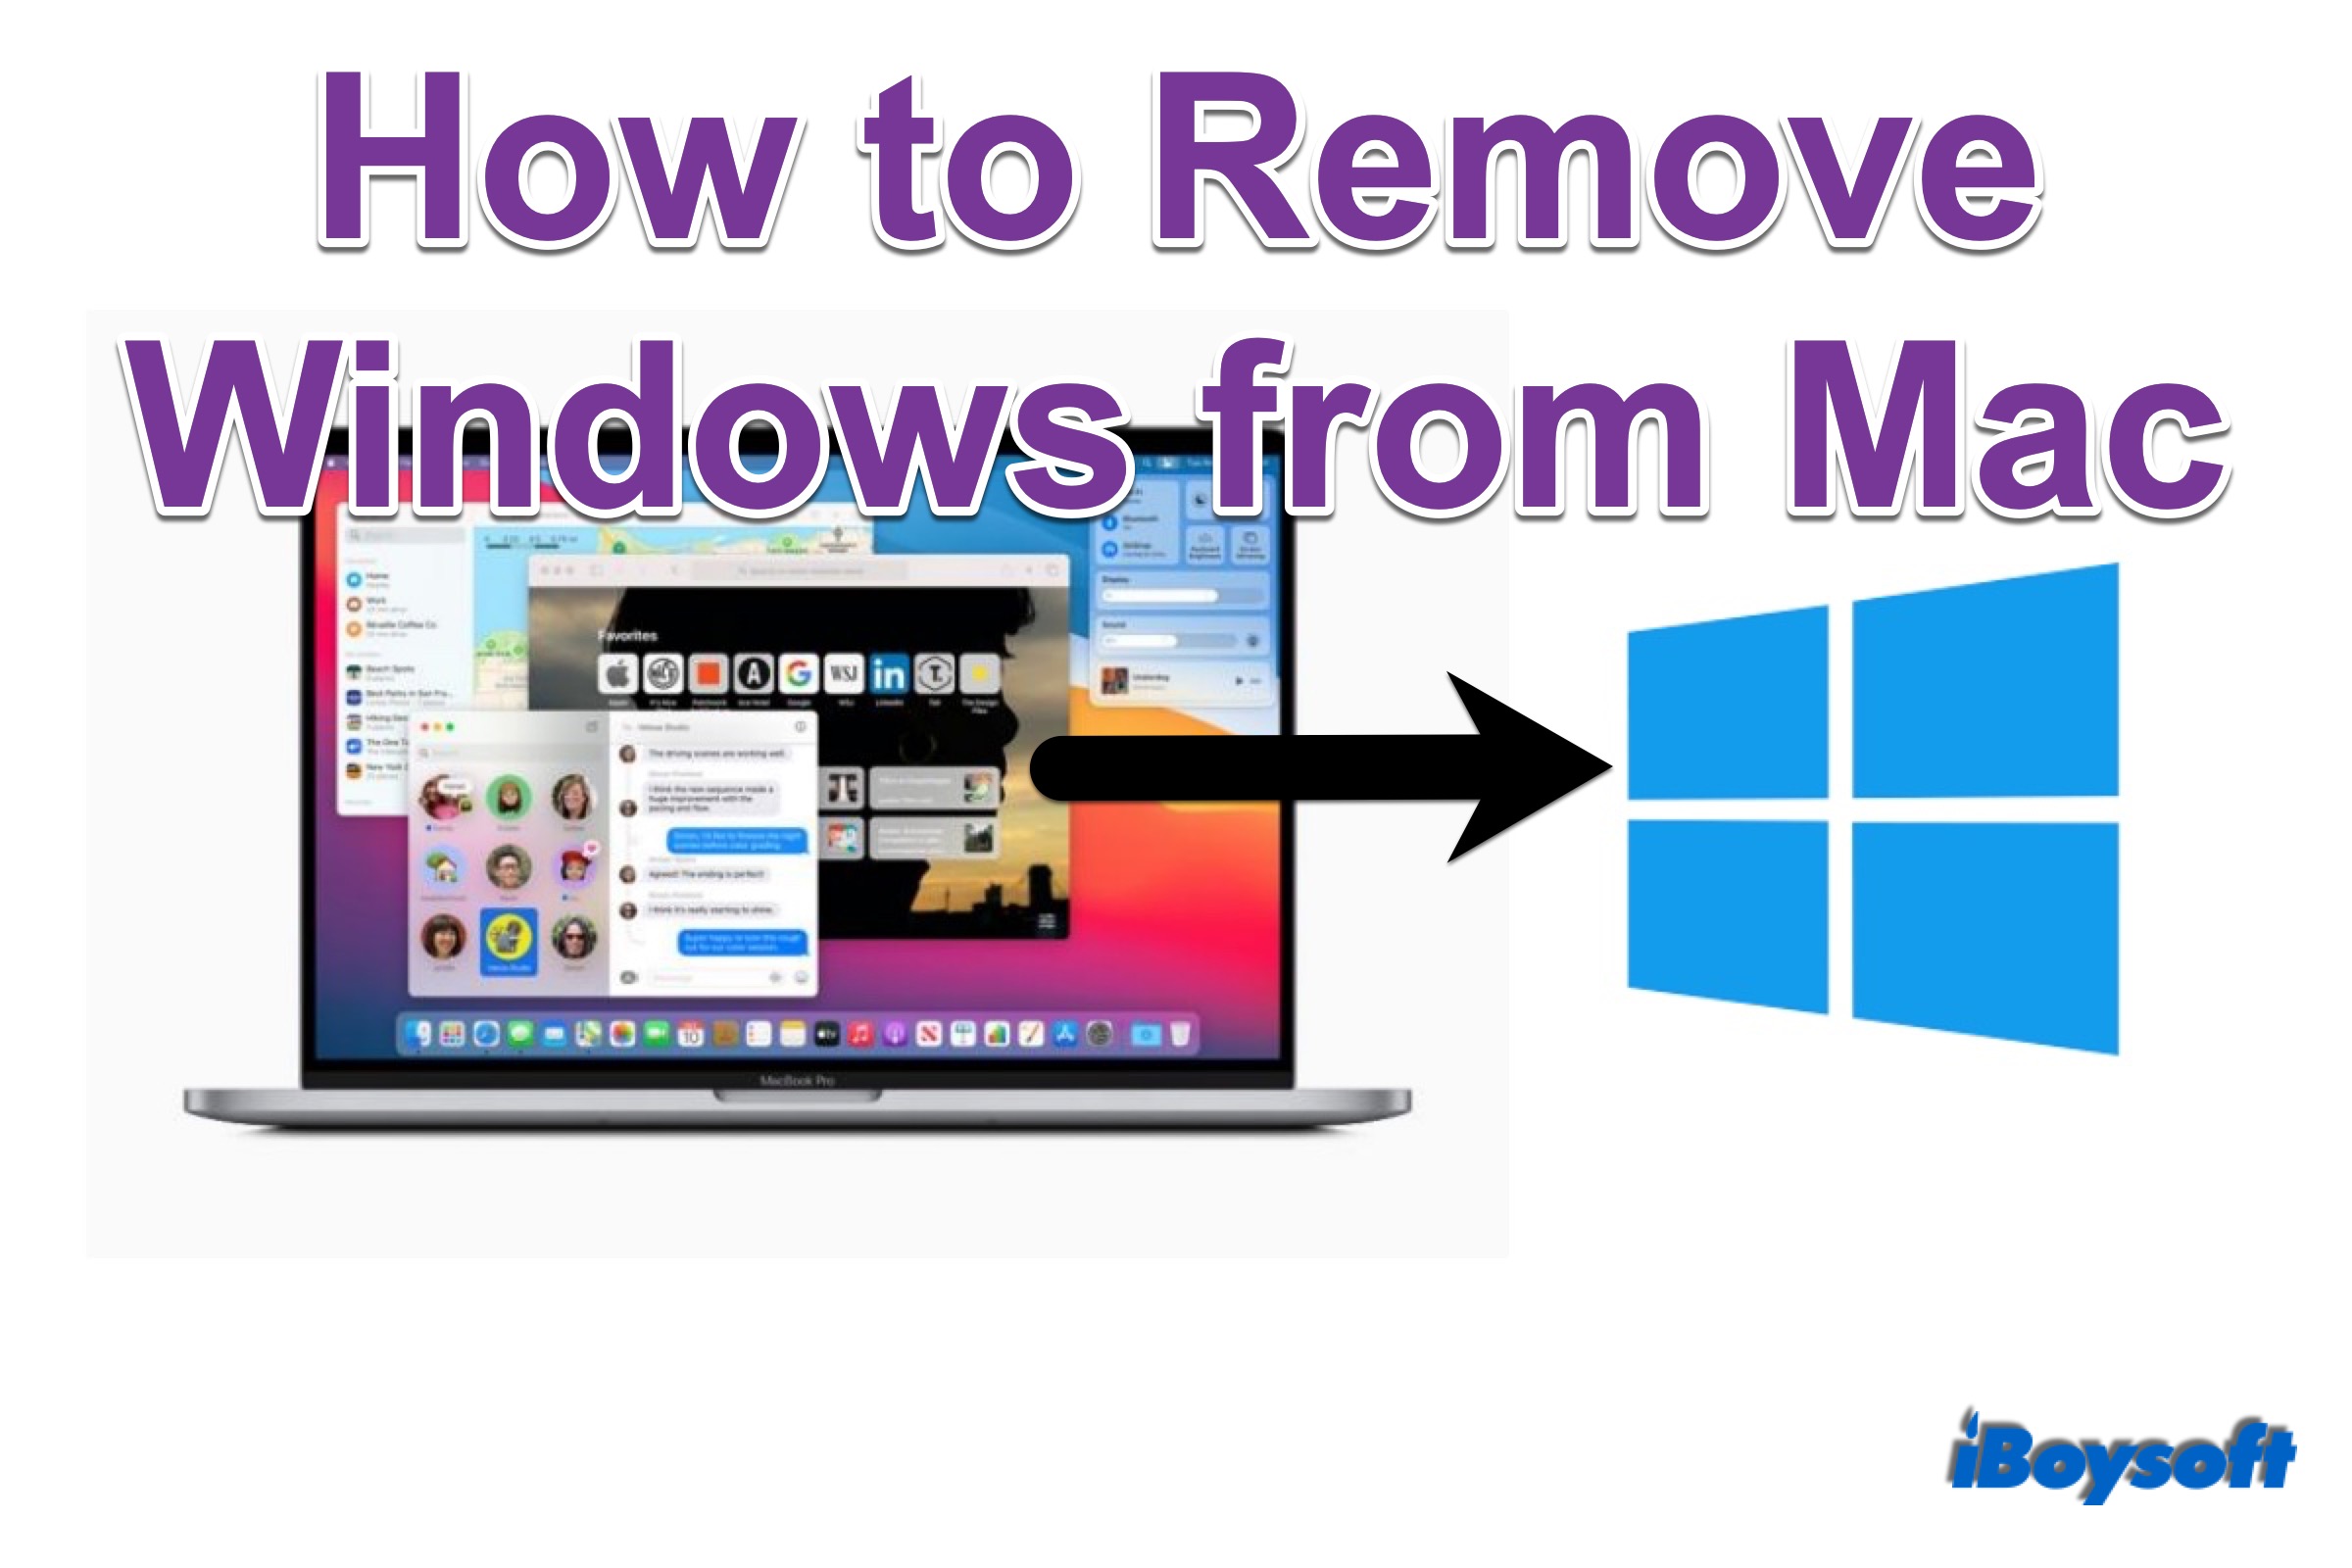 how to remove Windows from Mac